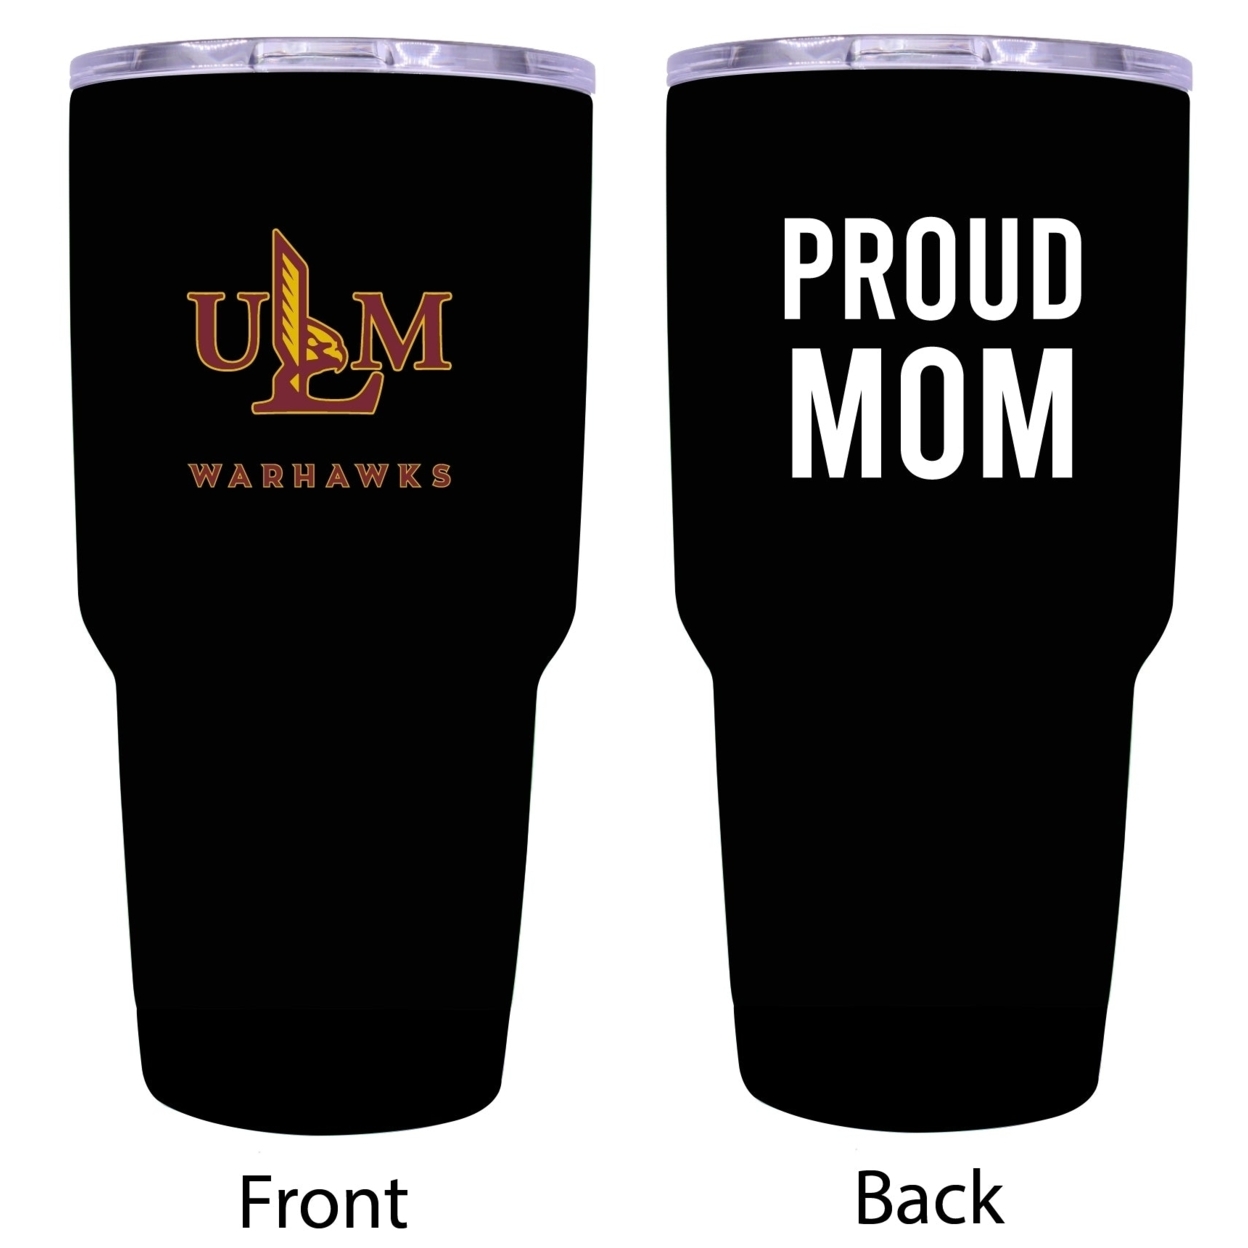 University Of Louisiana Monroe Proud Mom 24 Oz Insulated Stainless Steel Tumblers Choose Your Color. - Black